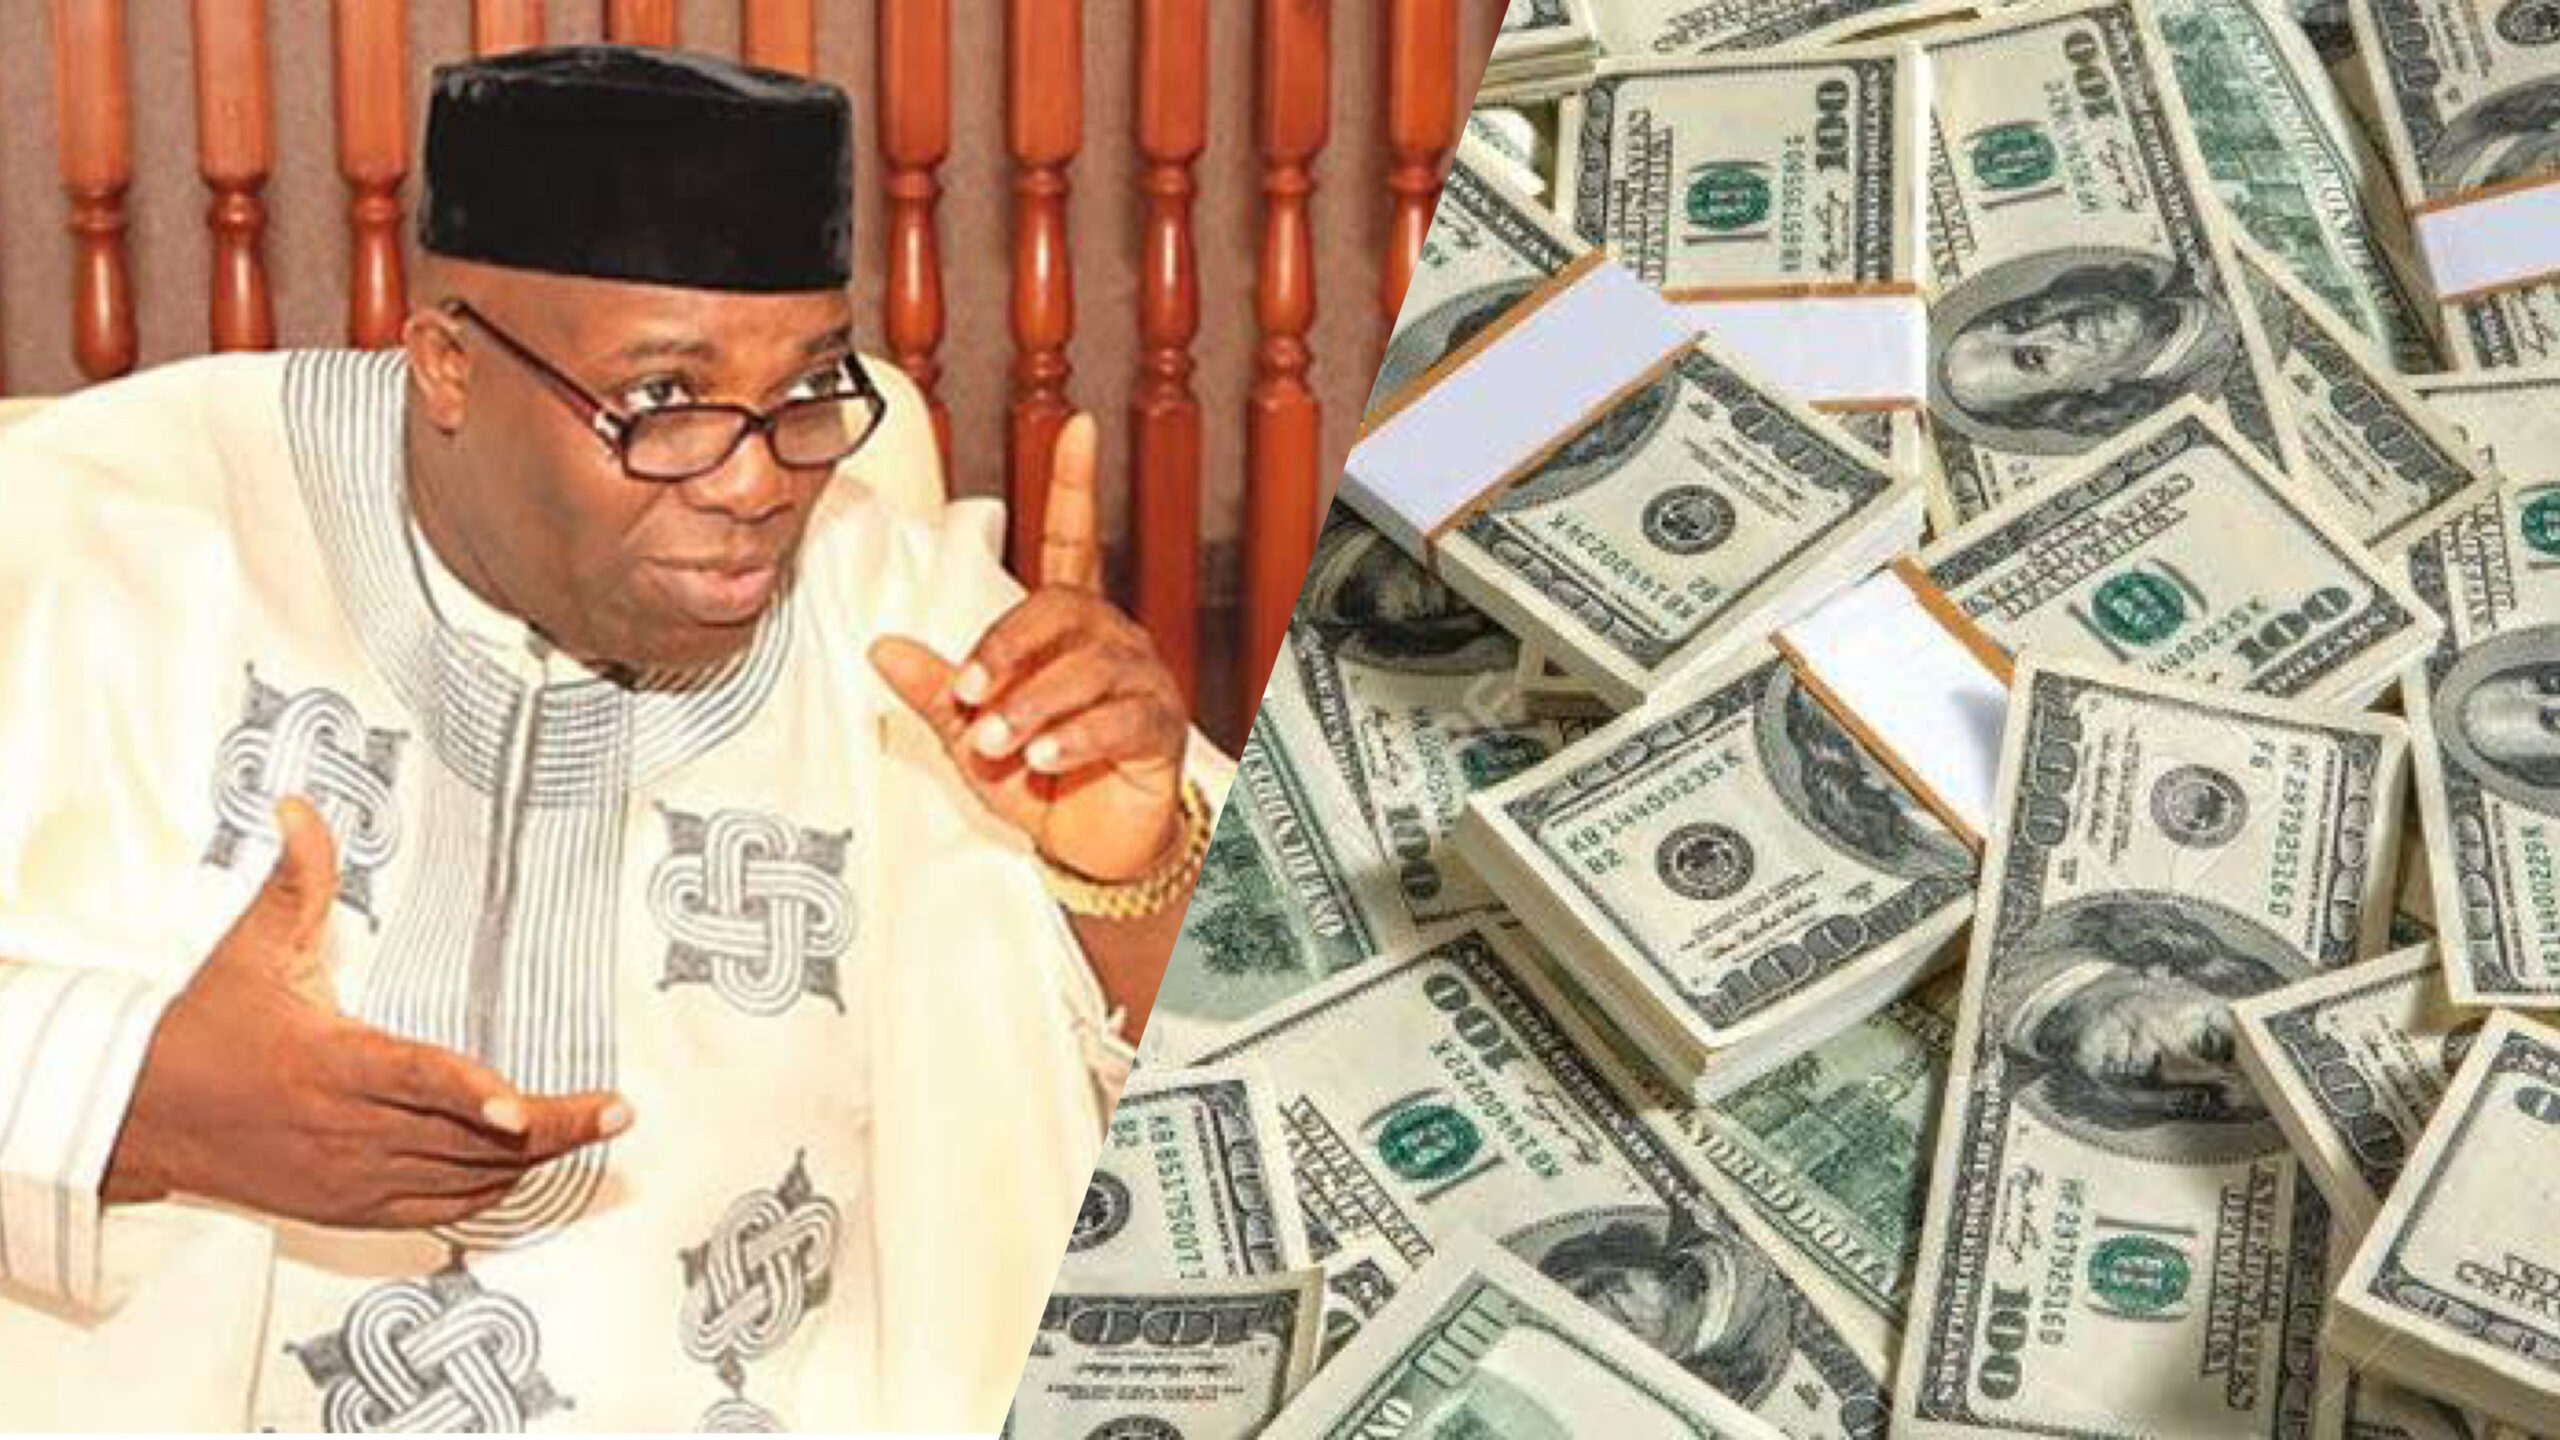 Doyin Okupe and dollars used to illustrate the story